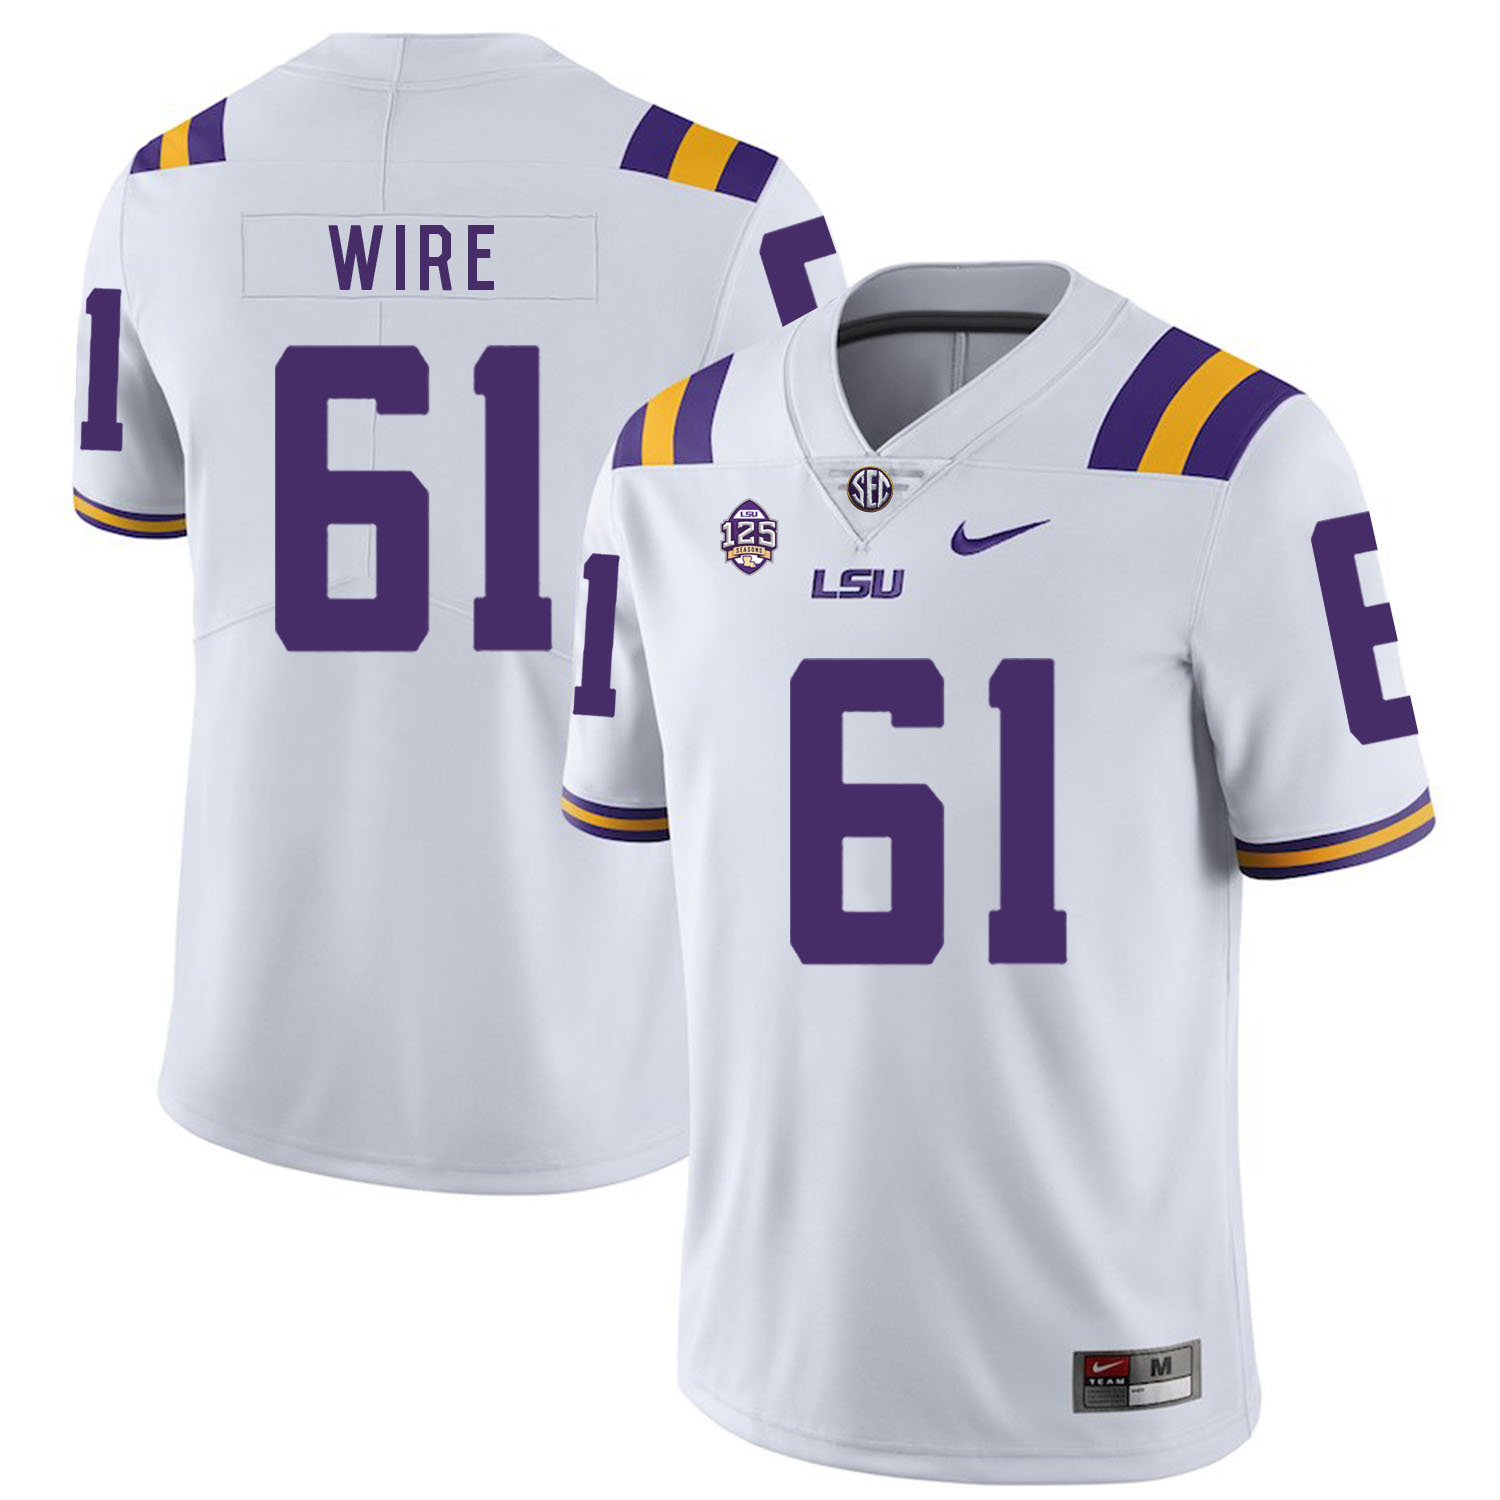 LSU Tigers 61 Cameron Wire White Nike College Football Jersey